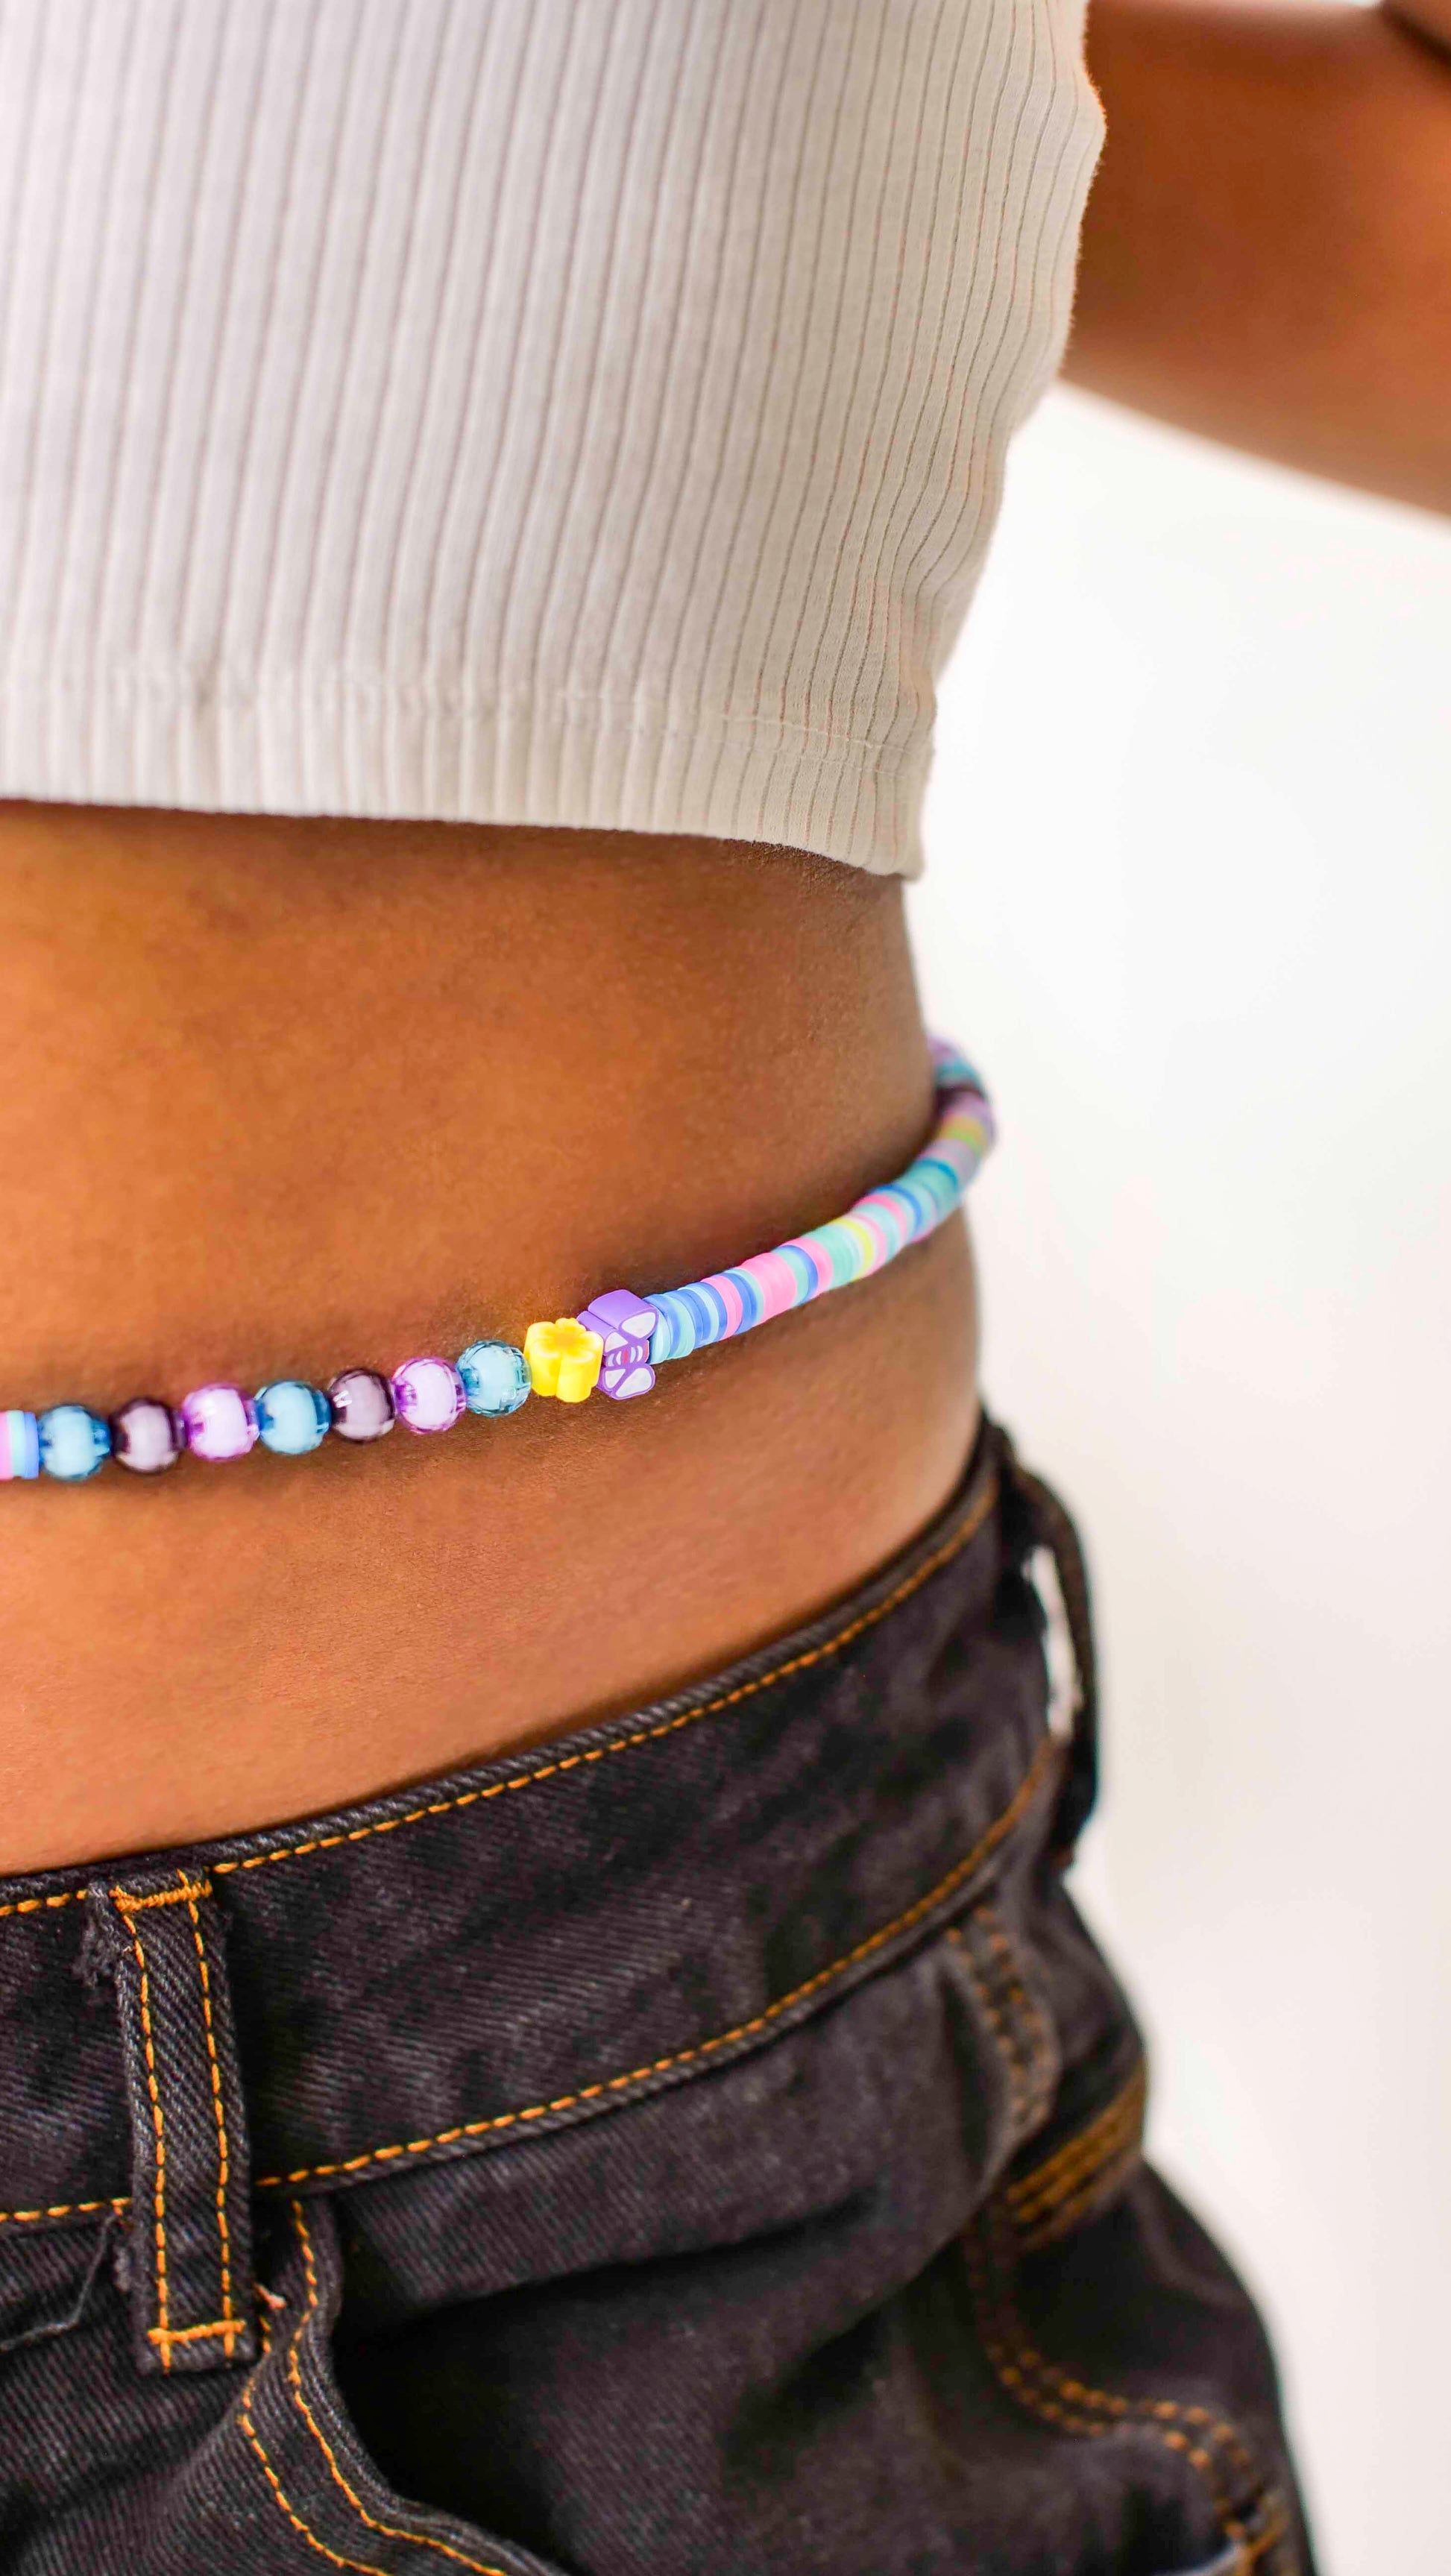 Handmade beaded belly chain made using multicolor flat rubber beads, flower and butterfly charms, and Discoball-like beads.